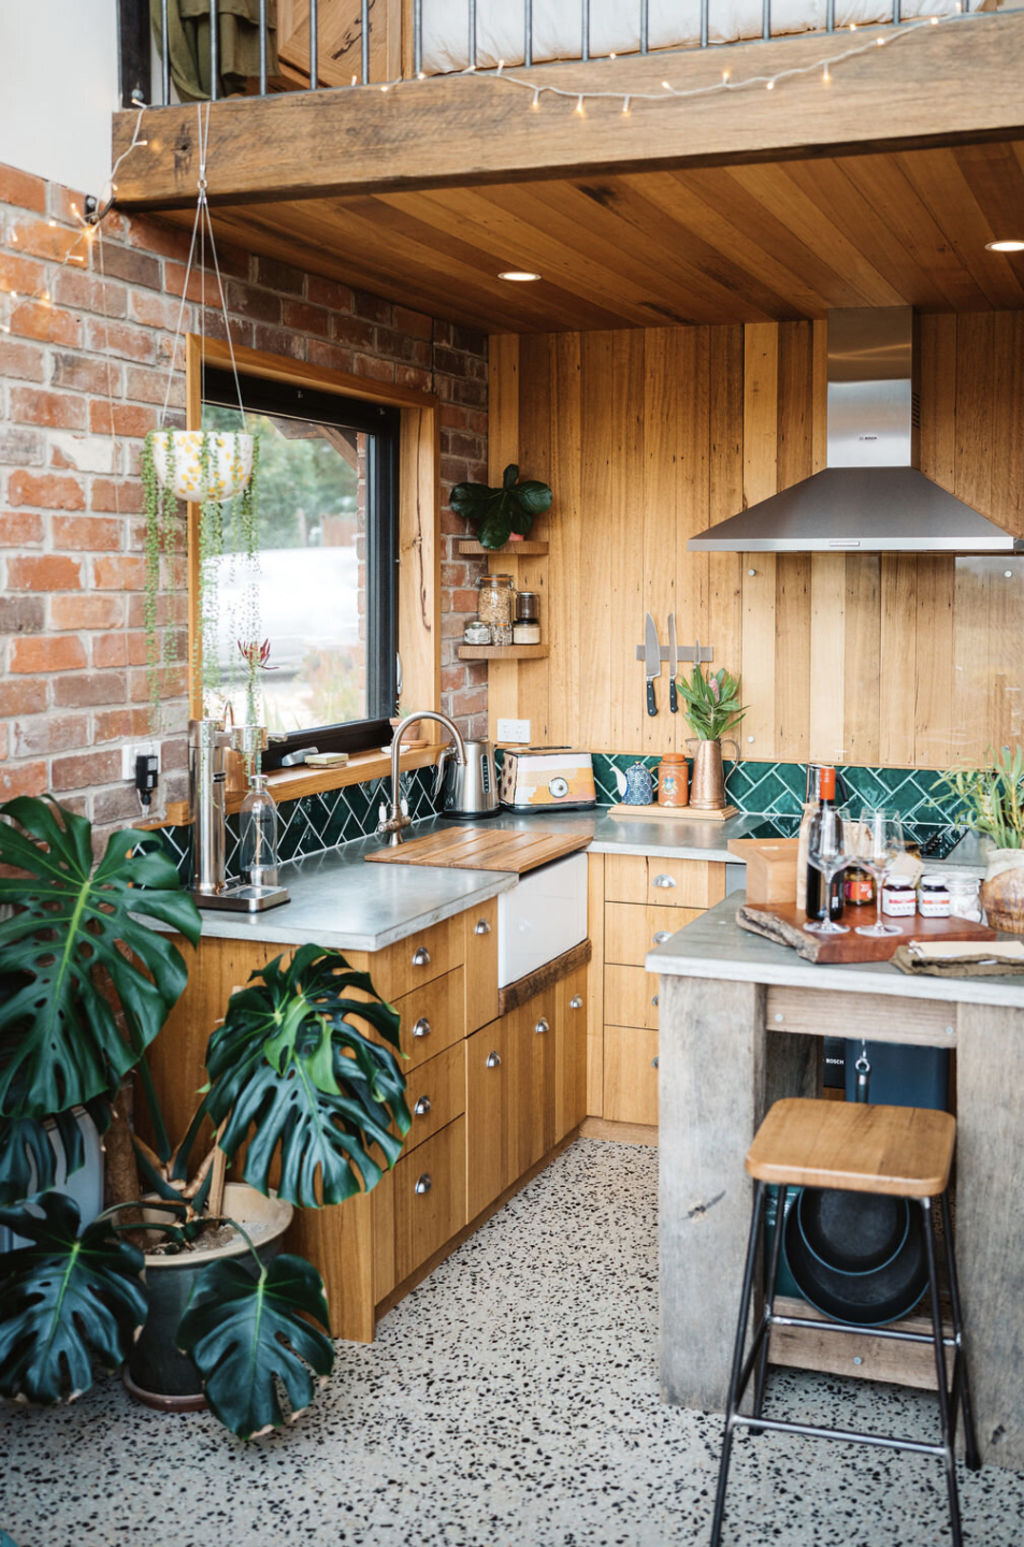 The walls, drawers and ceiling in the kitchen are made from recycled timber from an old basketball court. Photo: Harley Brown